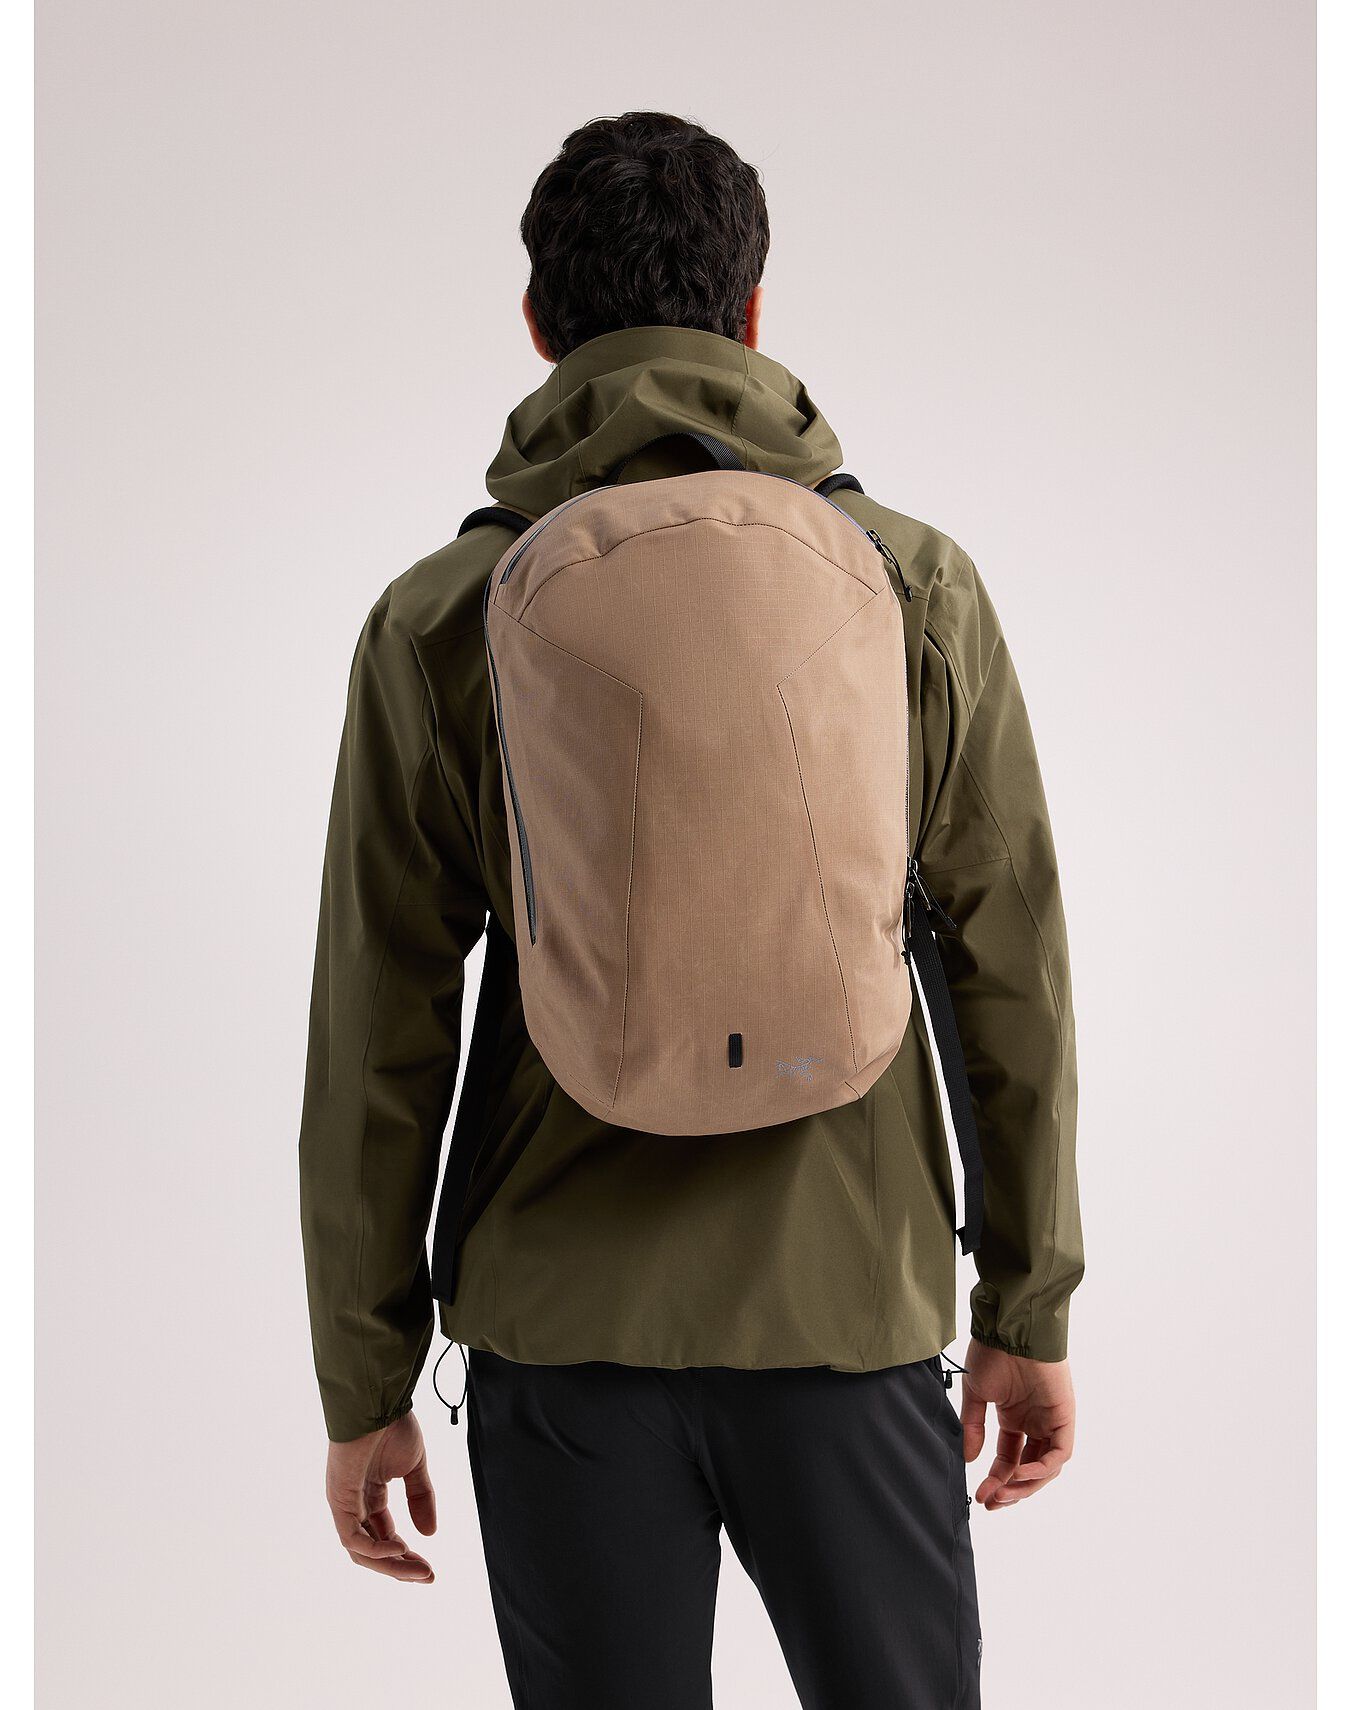 Buy Arc'teryx Granville 16 Backpack Canvas here | Outnorth